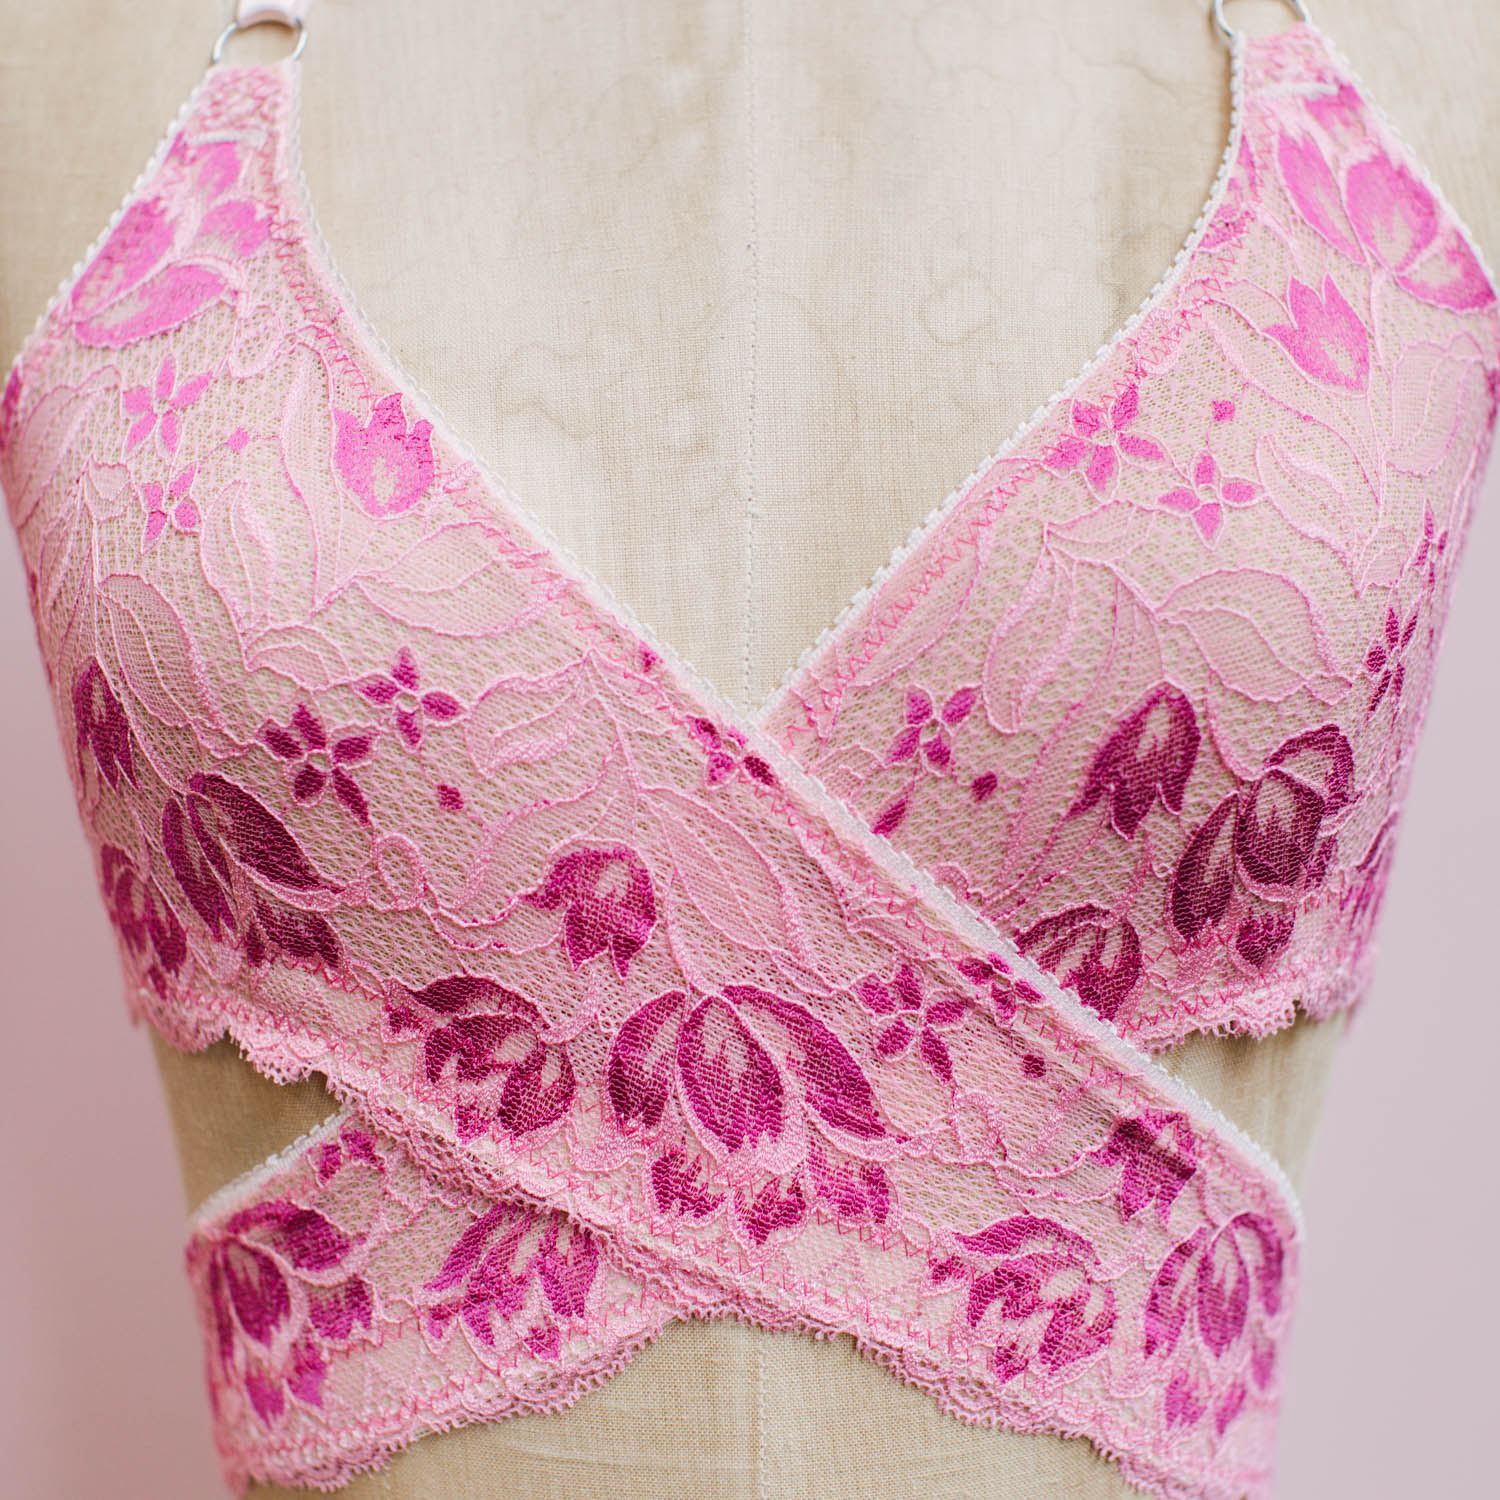 Lace Bralette - Free Sewing Pattern - Do It Yourself For Free